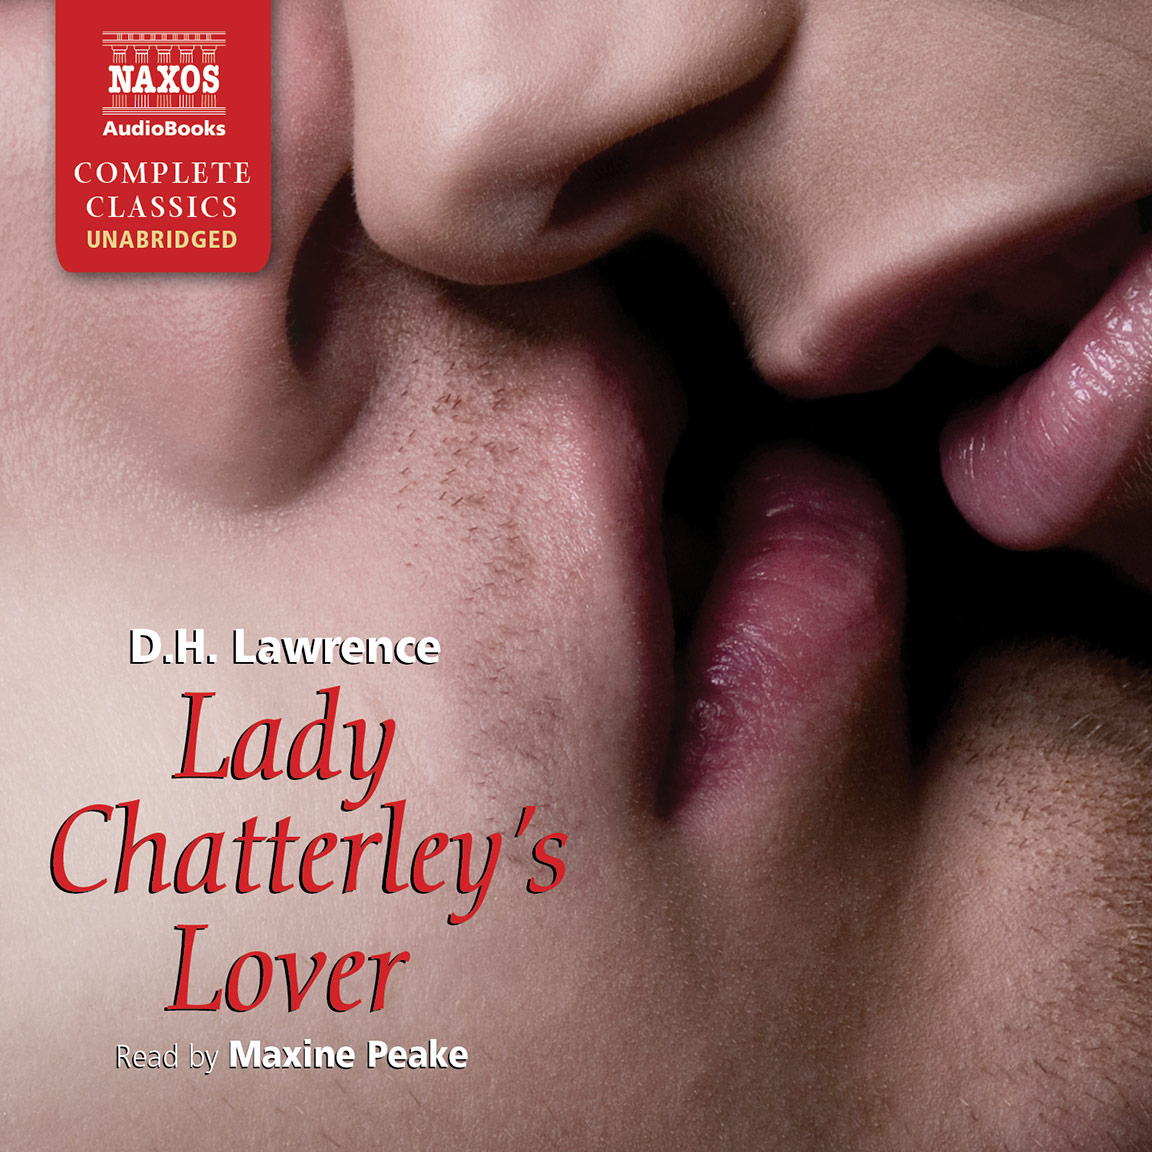 Lady Chatterley’s Lover (unabridged)